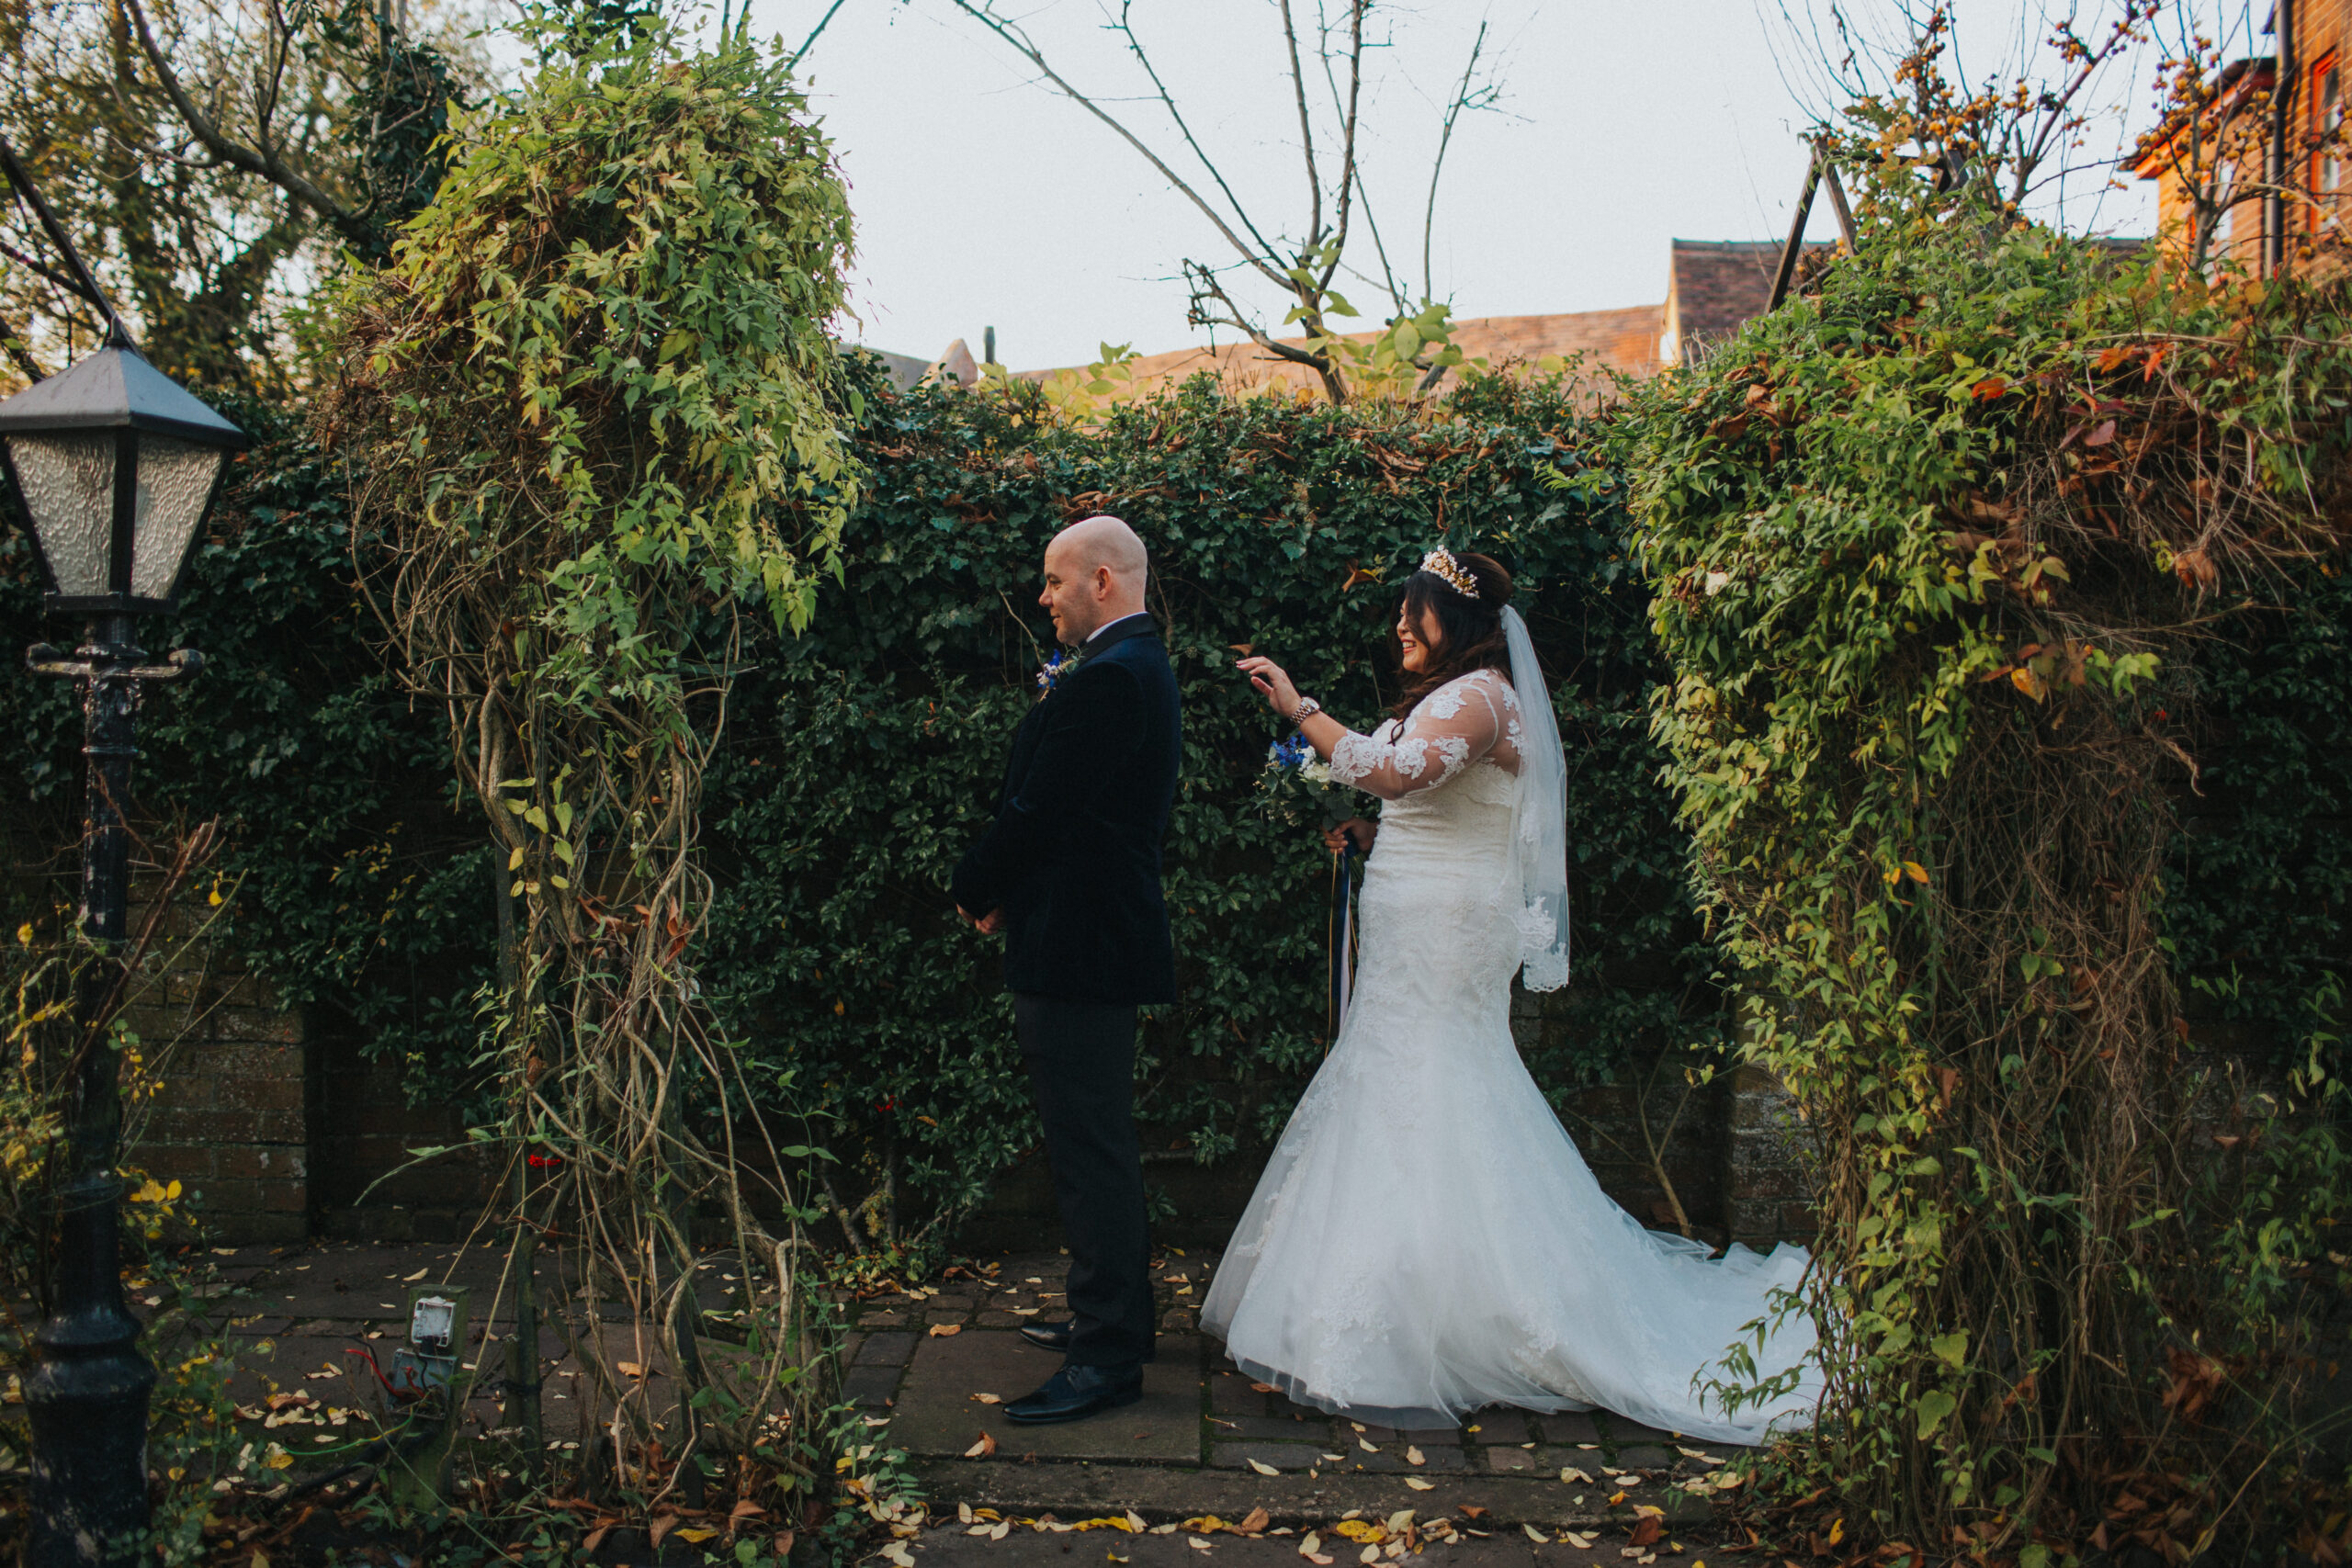 The Hundred House Hotel's autumnal wedding vibes